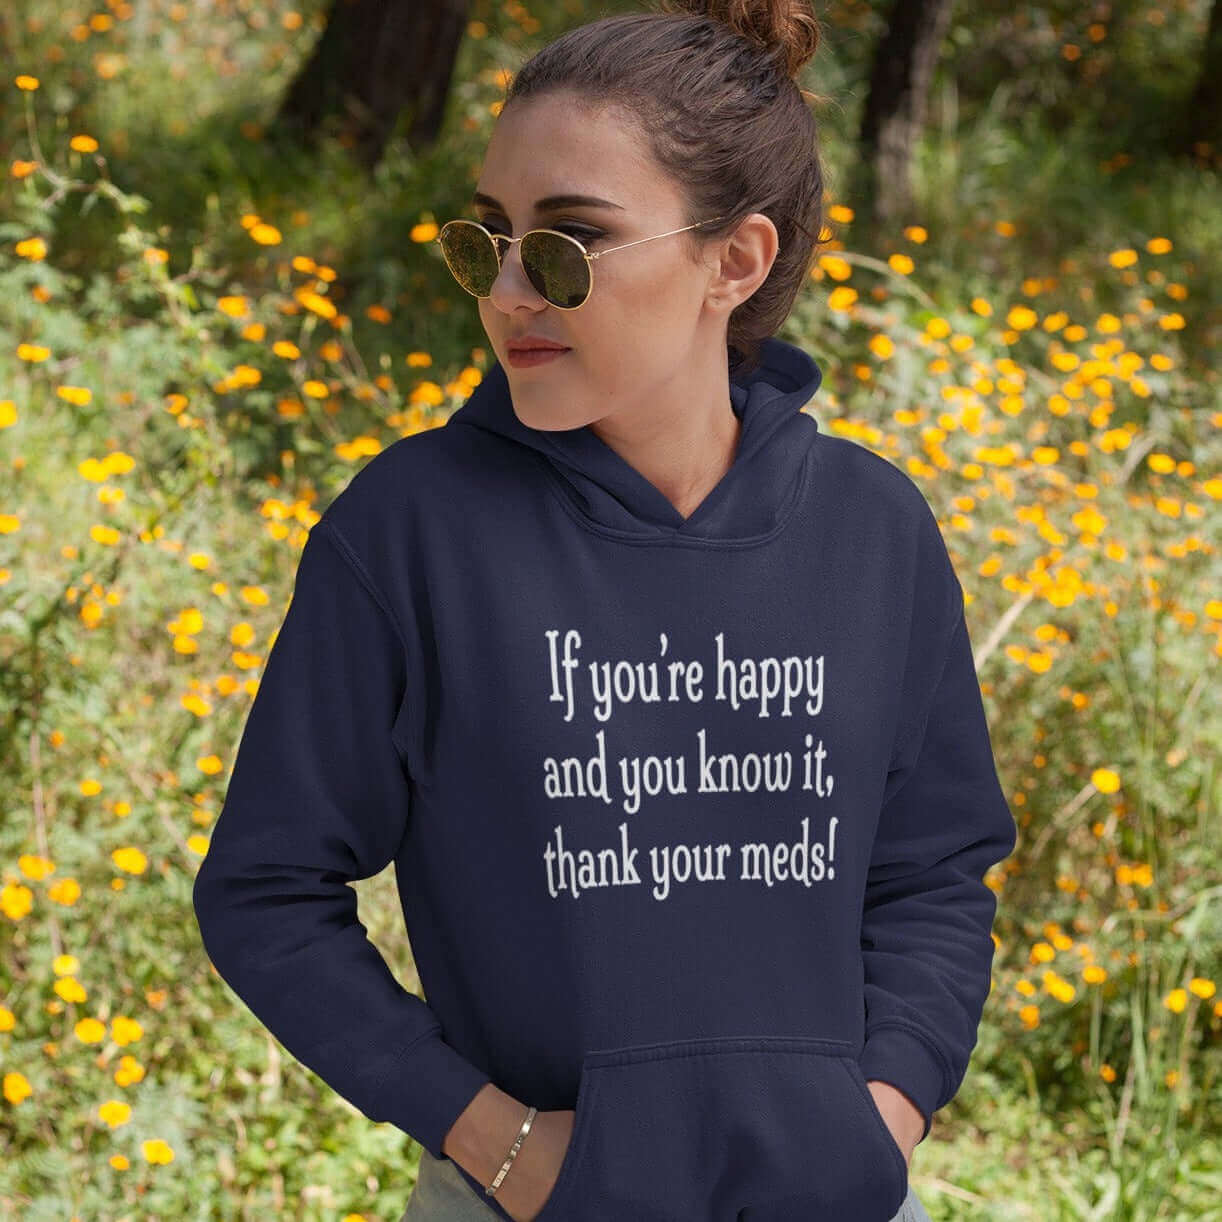 woman wearing hoodie standing near flowers if you're happy and you know it thank your meds witticismsrus